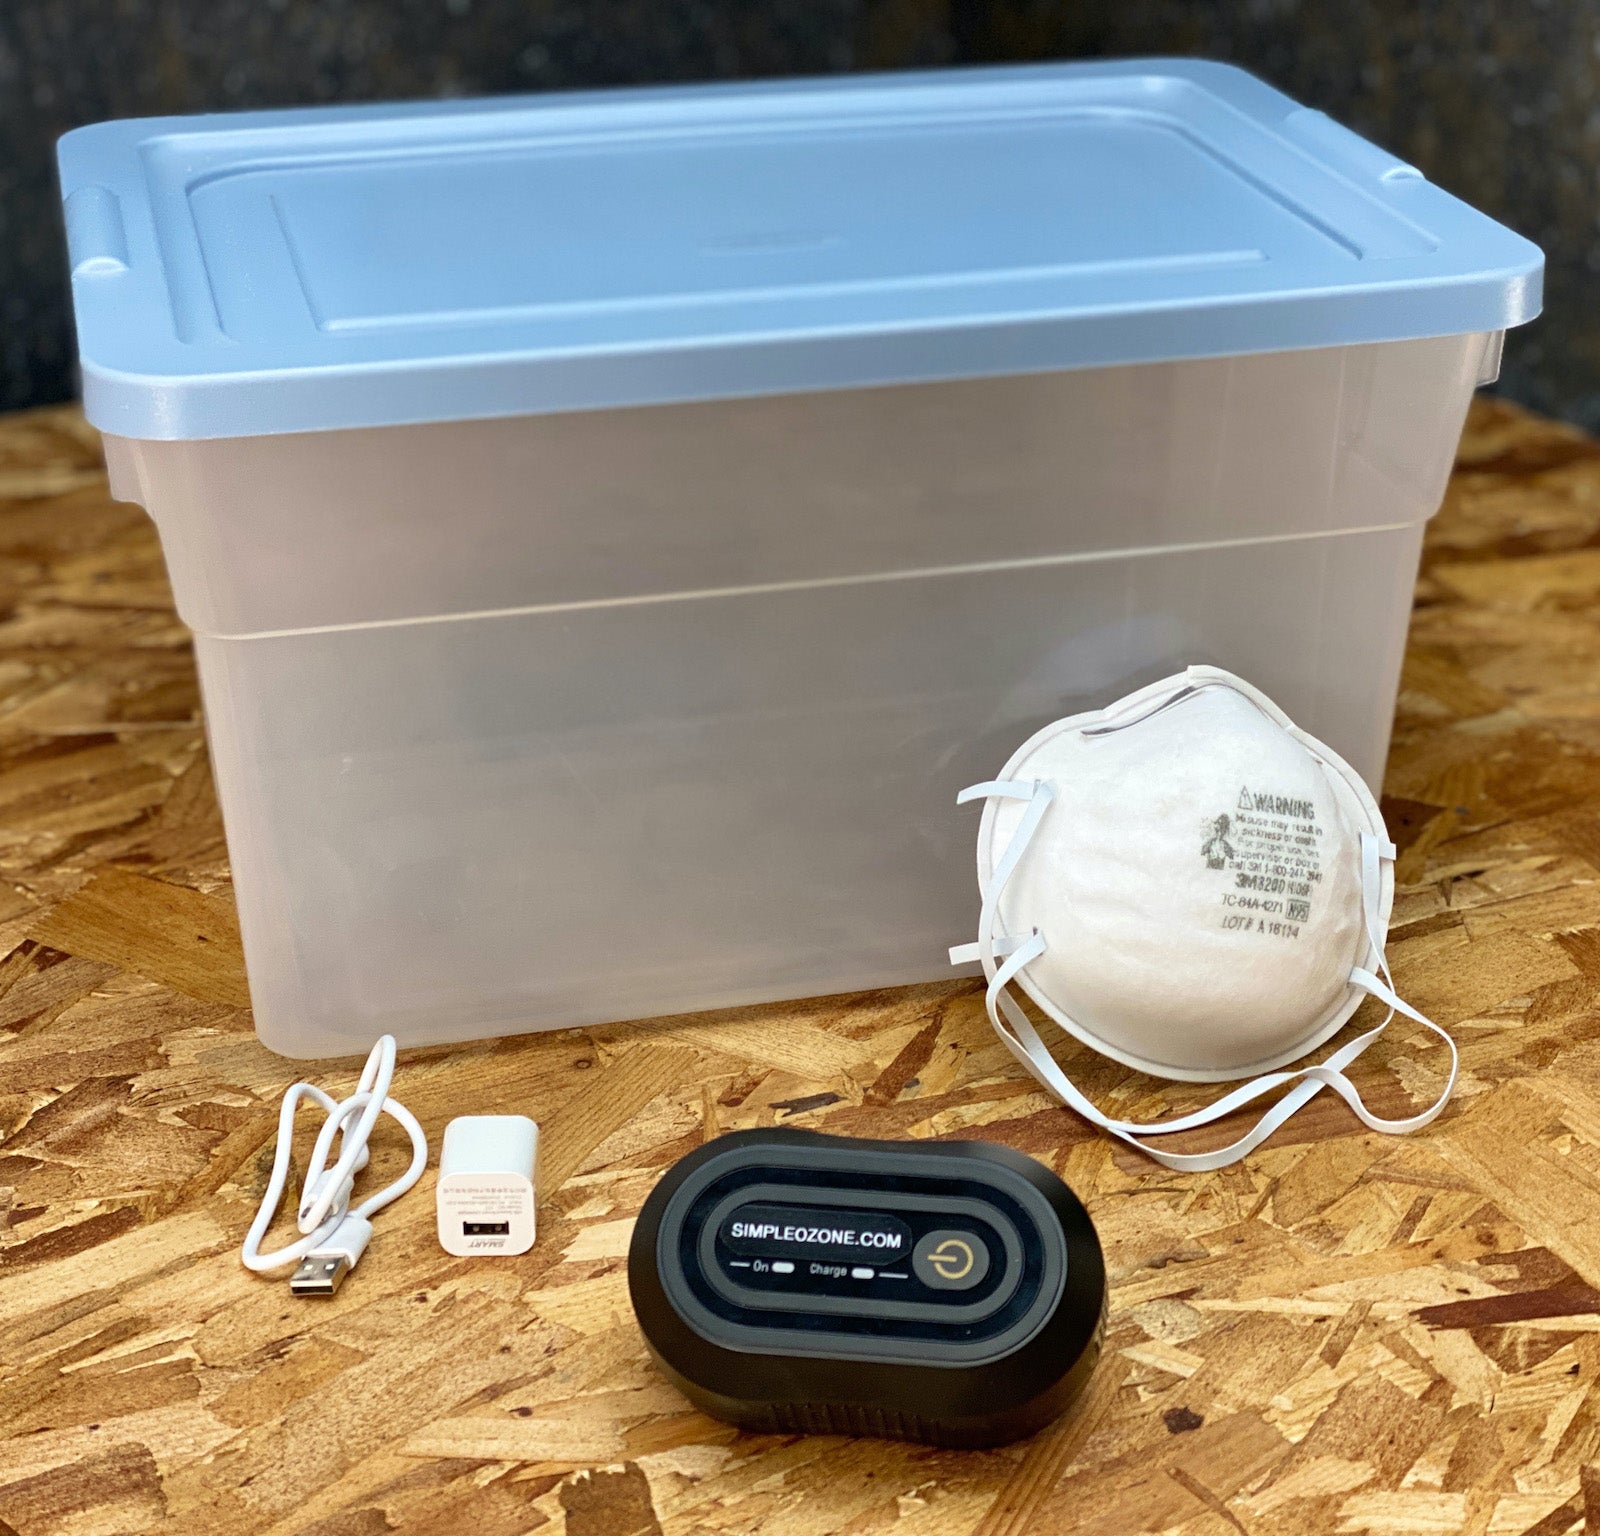 An example of the items needed for the Simple Ozone Sterilizer method. Photo by Photo by John Schiff, Obtainium Science and Industry Surplus.